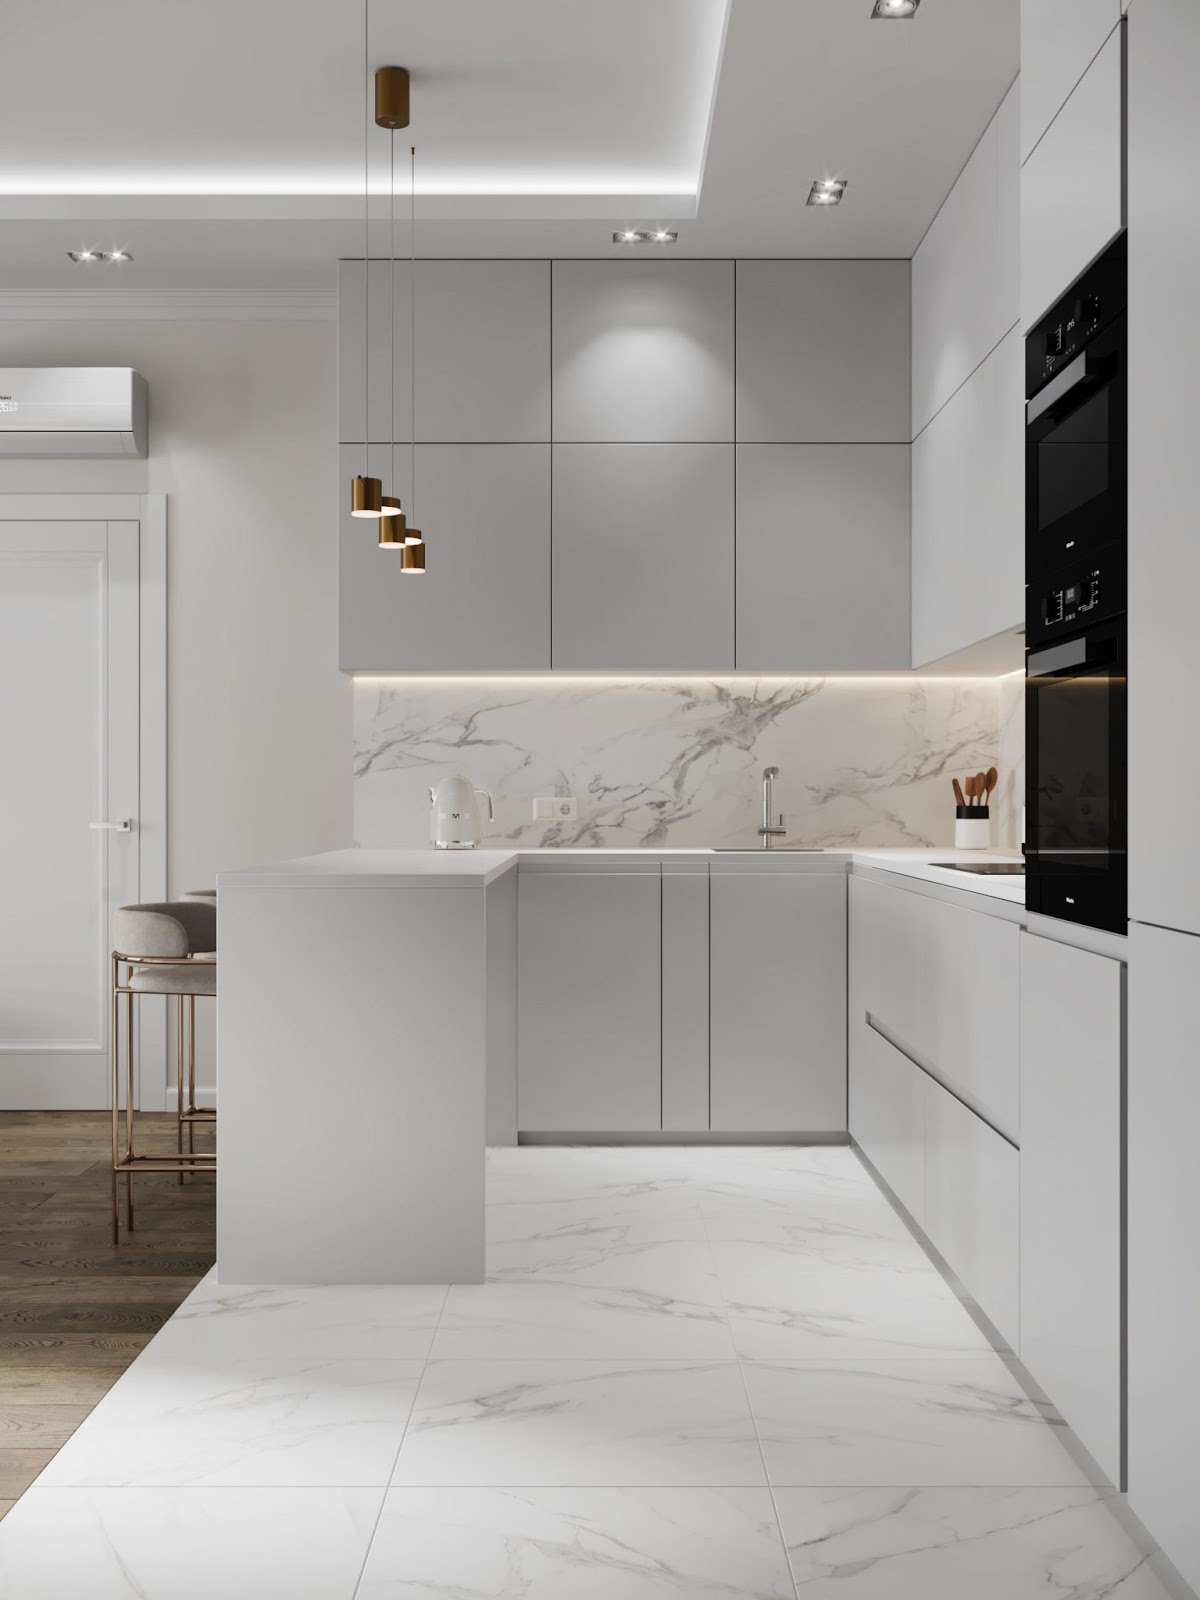 Monochrome - The Complete Guide to Designing a Modern Kitchen